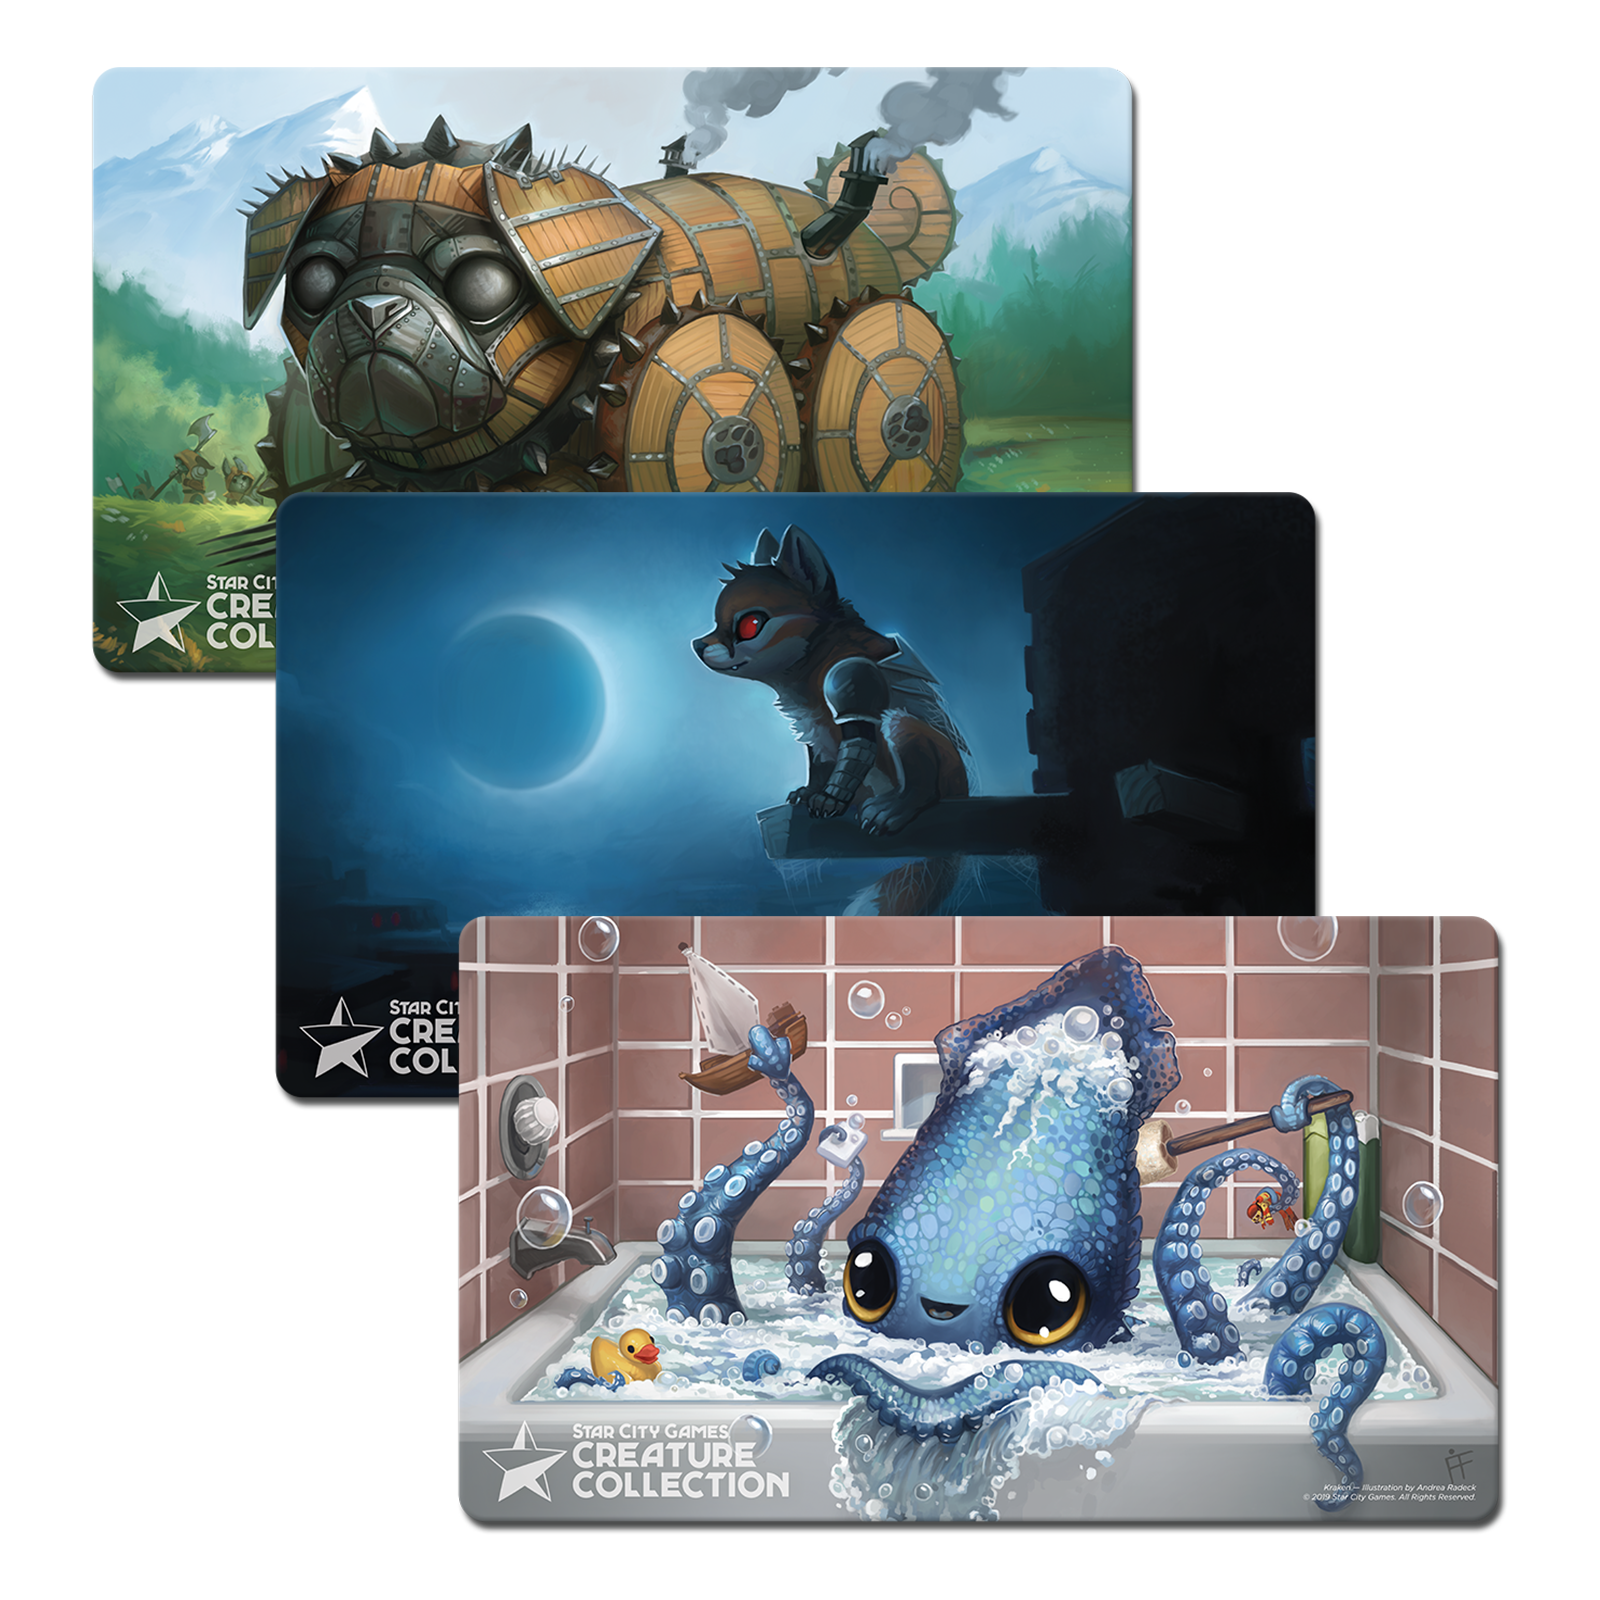 Star City Games Creature Collection Playmat For Mtg / Pokemon  Tcg / Yugioh Ccg